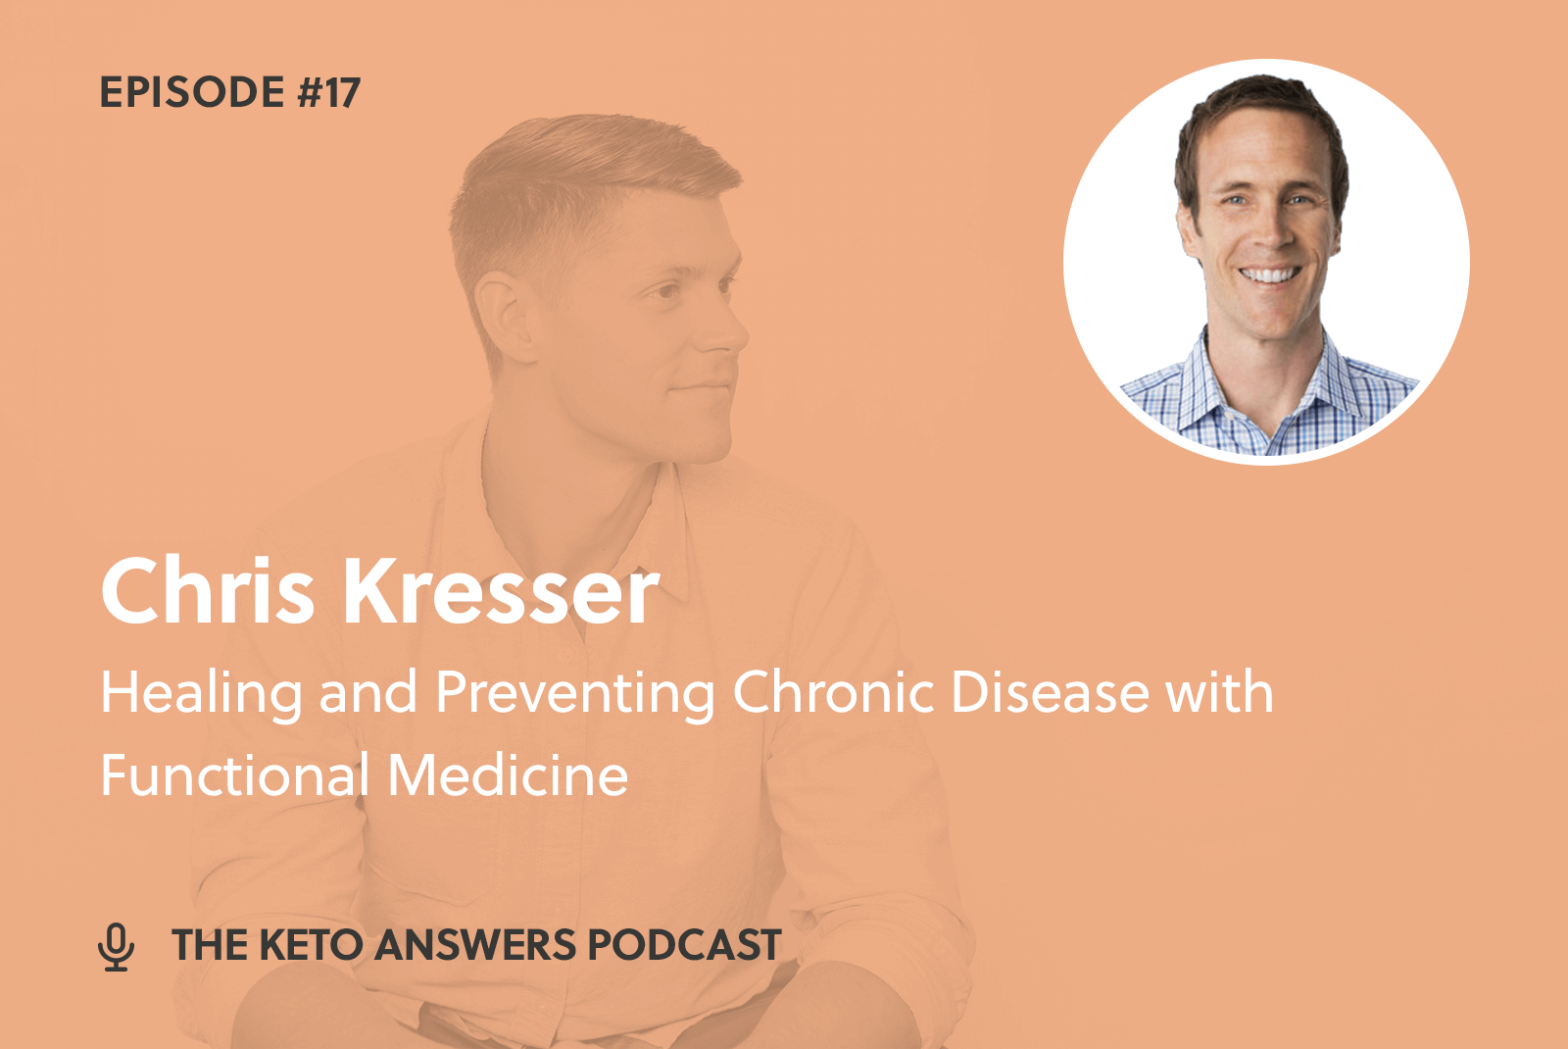 017: Healing and Preventing Chronic Disease with Functional Medicine - Chris Kresser